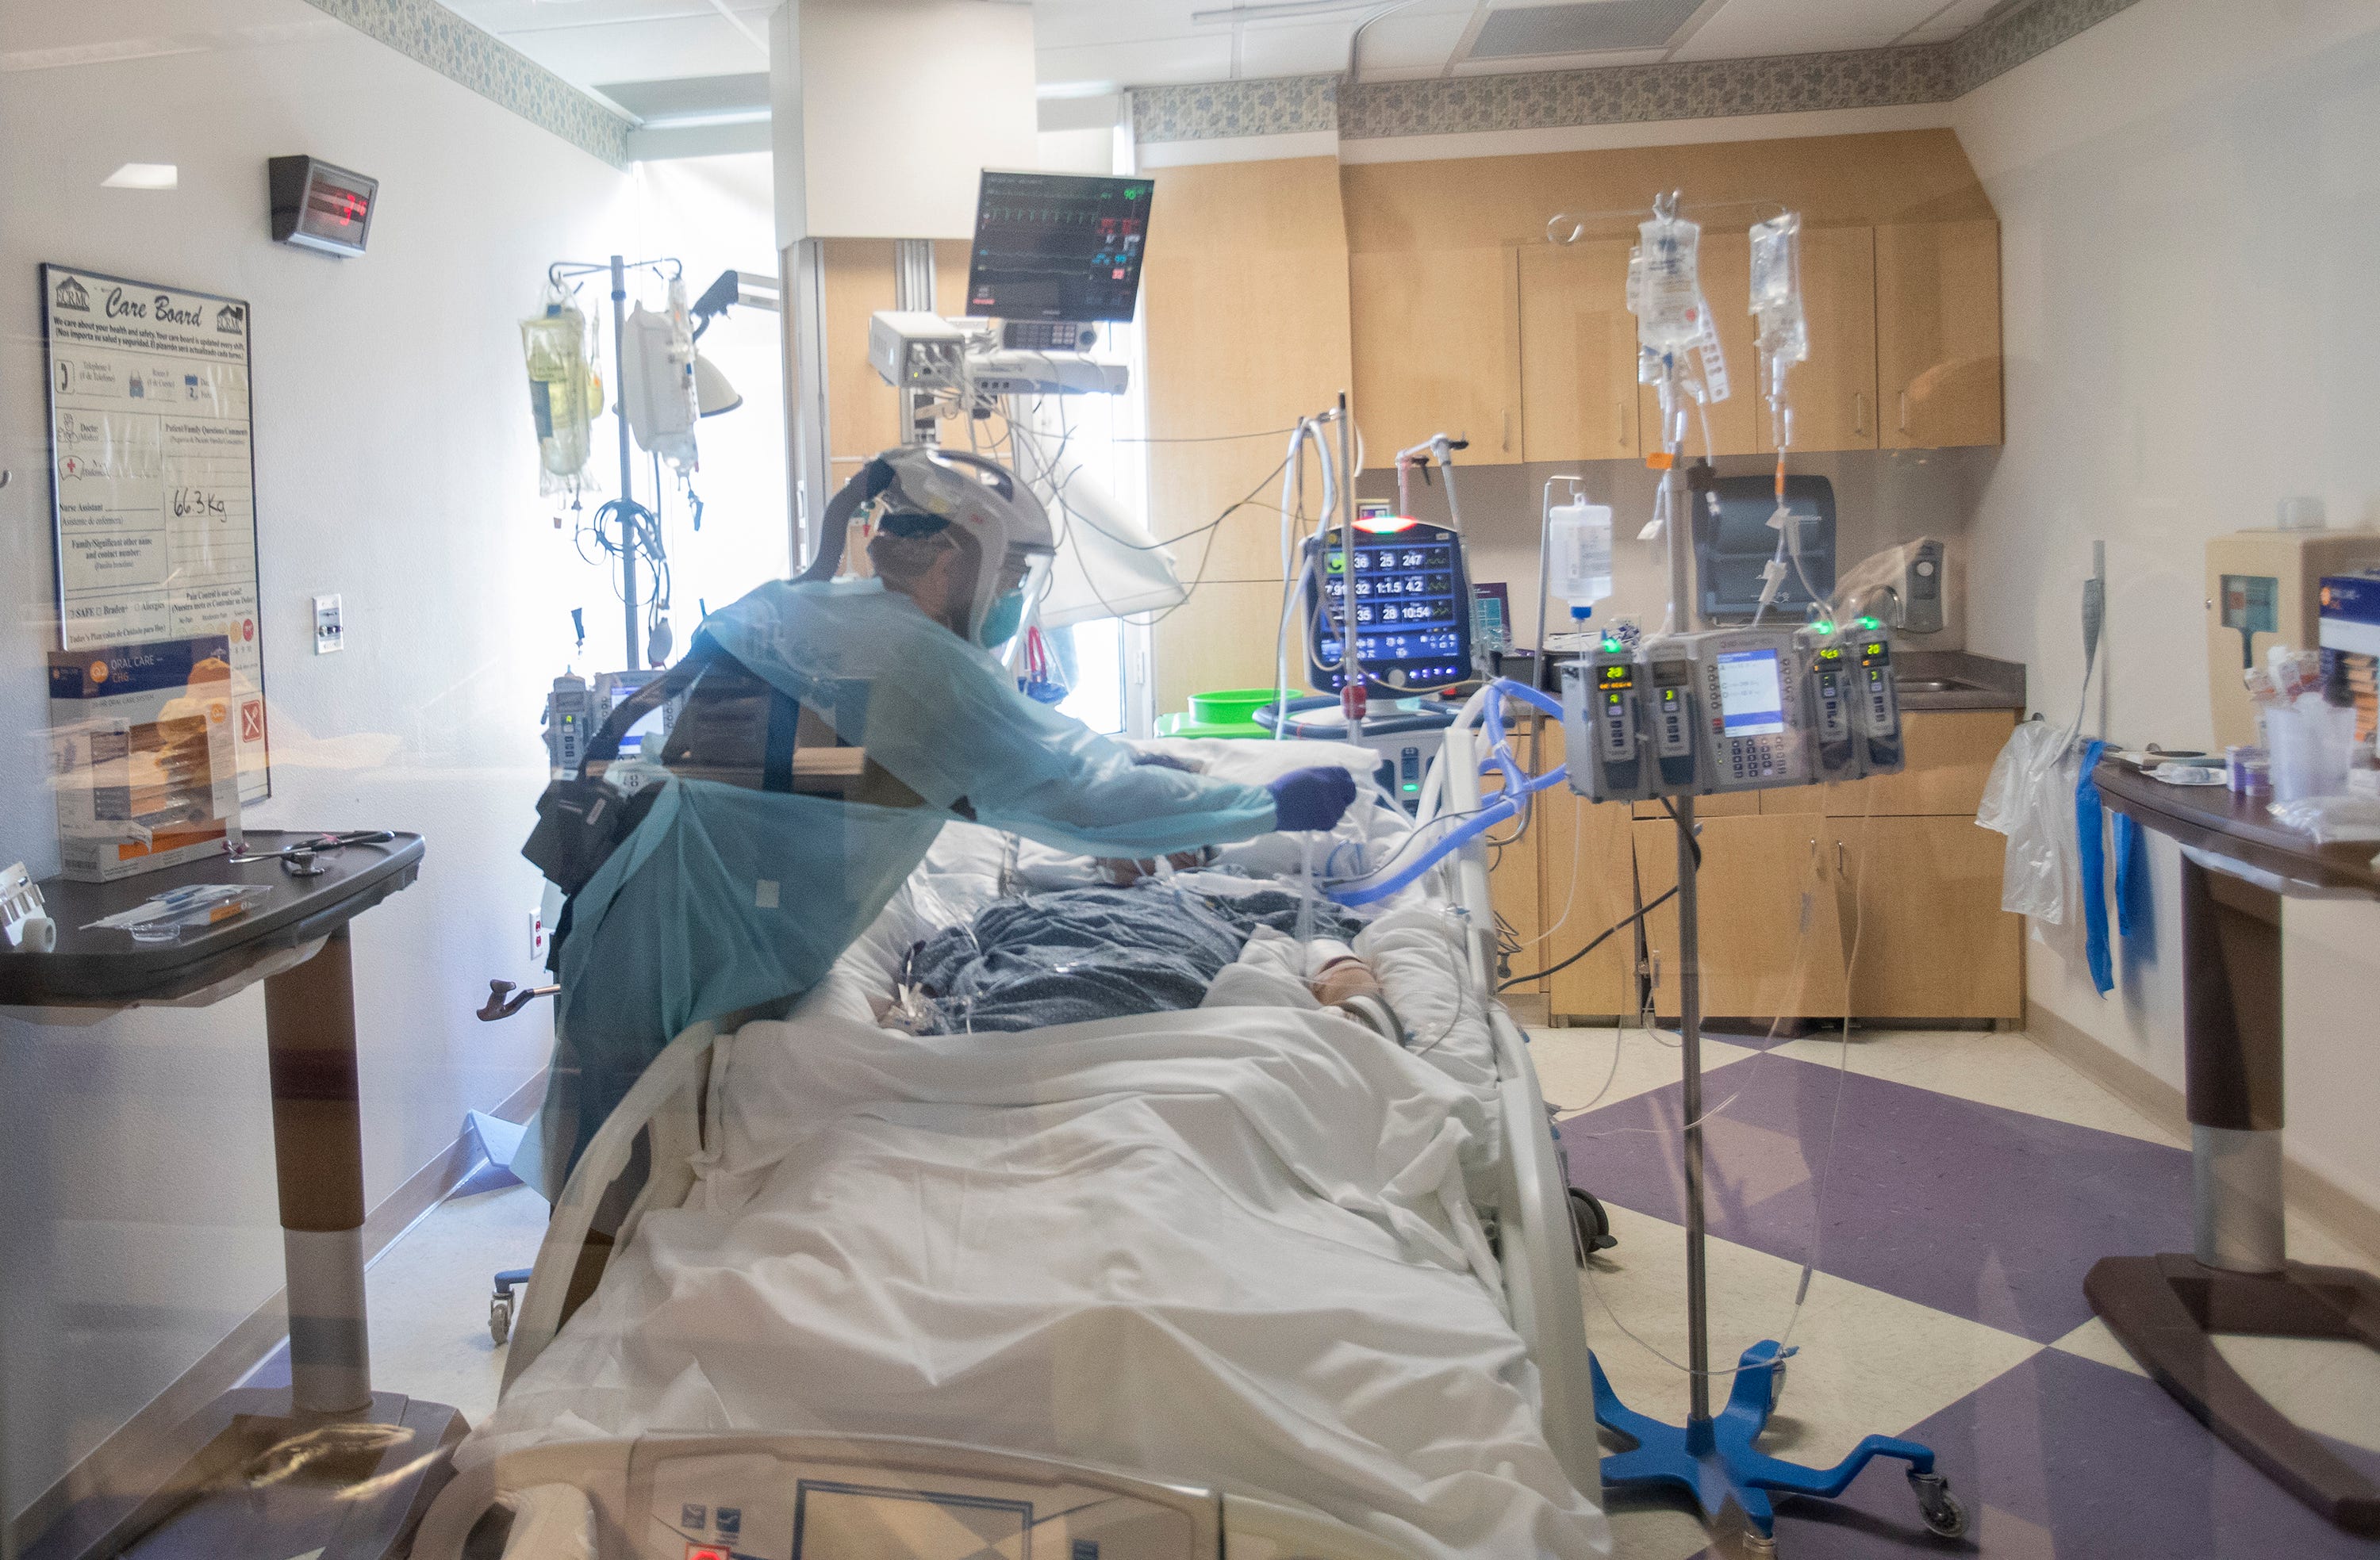 An El Centro Regional Medical Center staff member attends a patient who is COVID-19 positive and has been intubated on May 30, 2020.